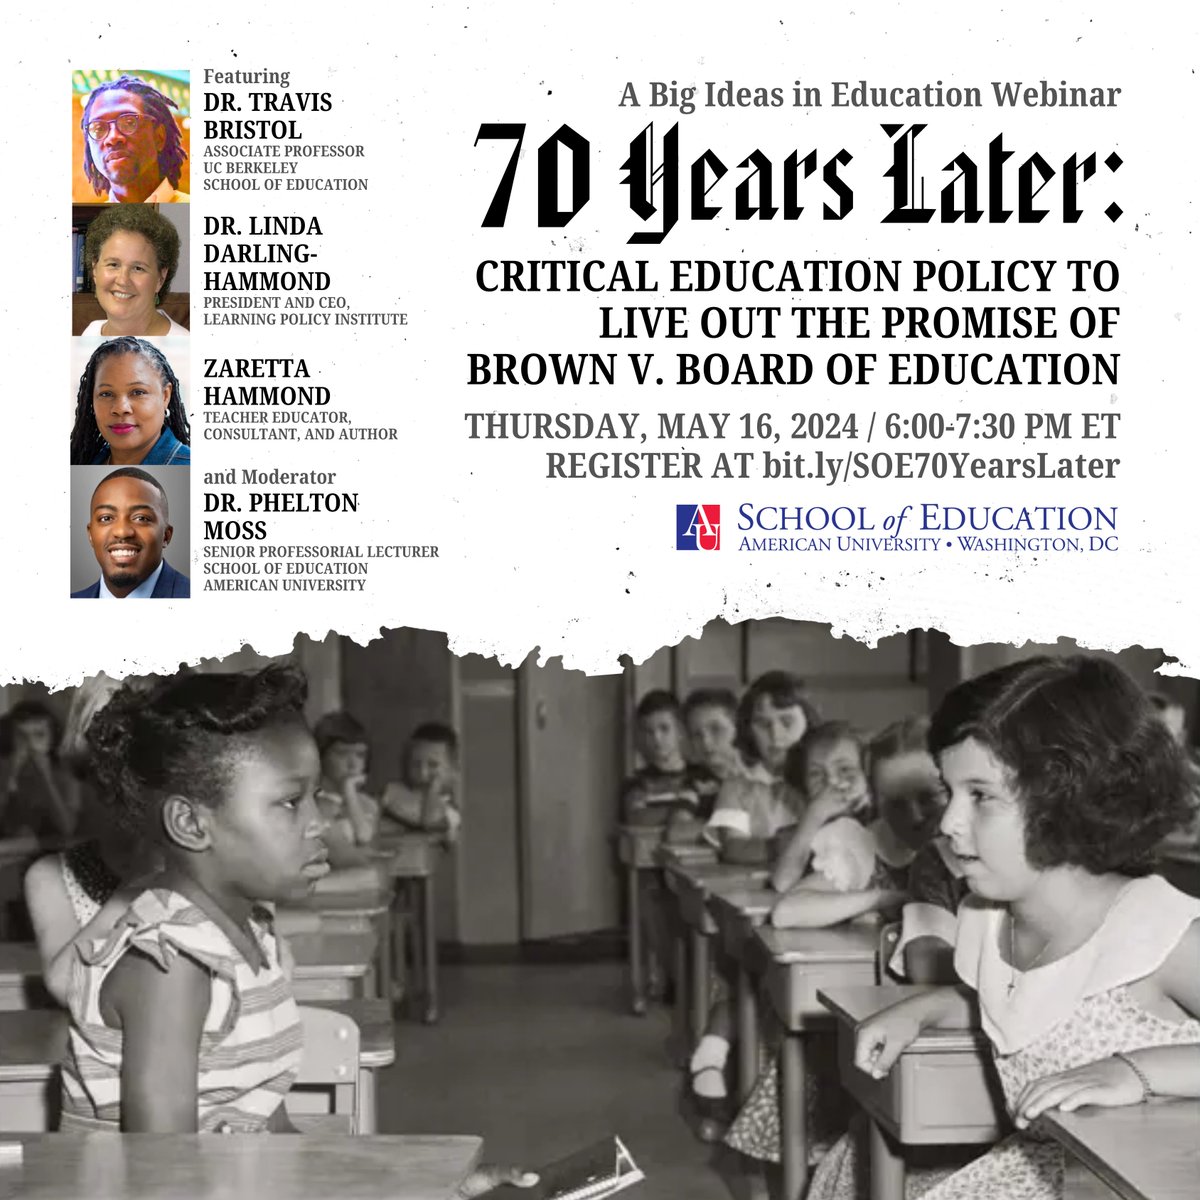 In Two weeks! Join us for a historical webinar, “70 Years Later: Critical Education Policy to Live Out the Promise of Brown vs. Board of Education” > Thursday, May 16, 2024, from 6:00-7:30 p.m. ET > Register at bit.ly/SOE70YearsLater @AmericanU